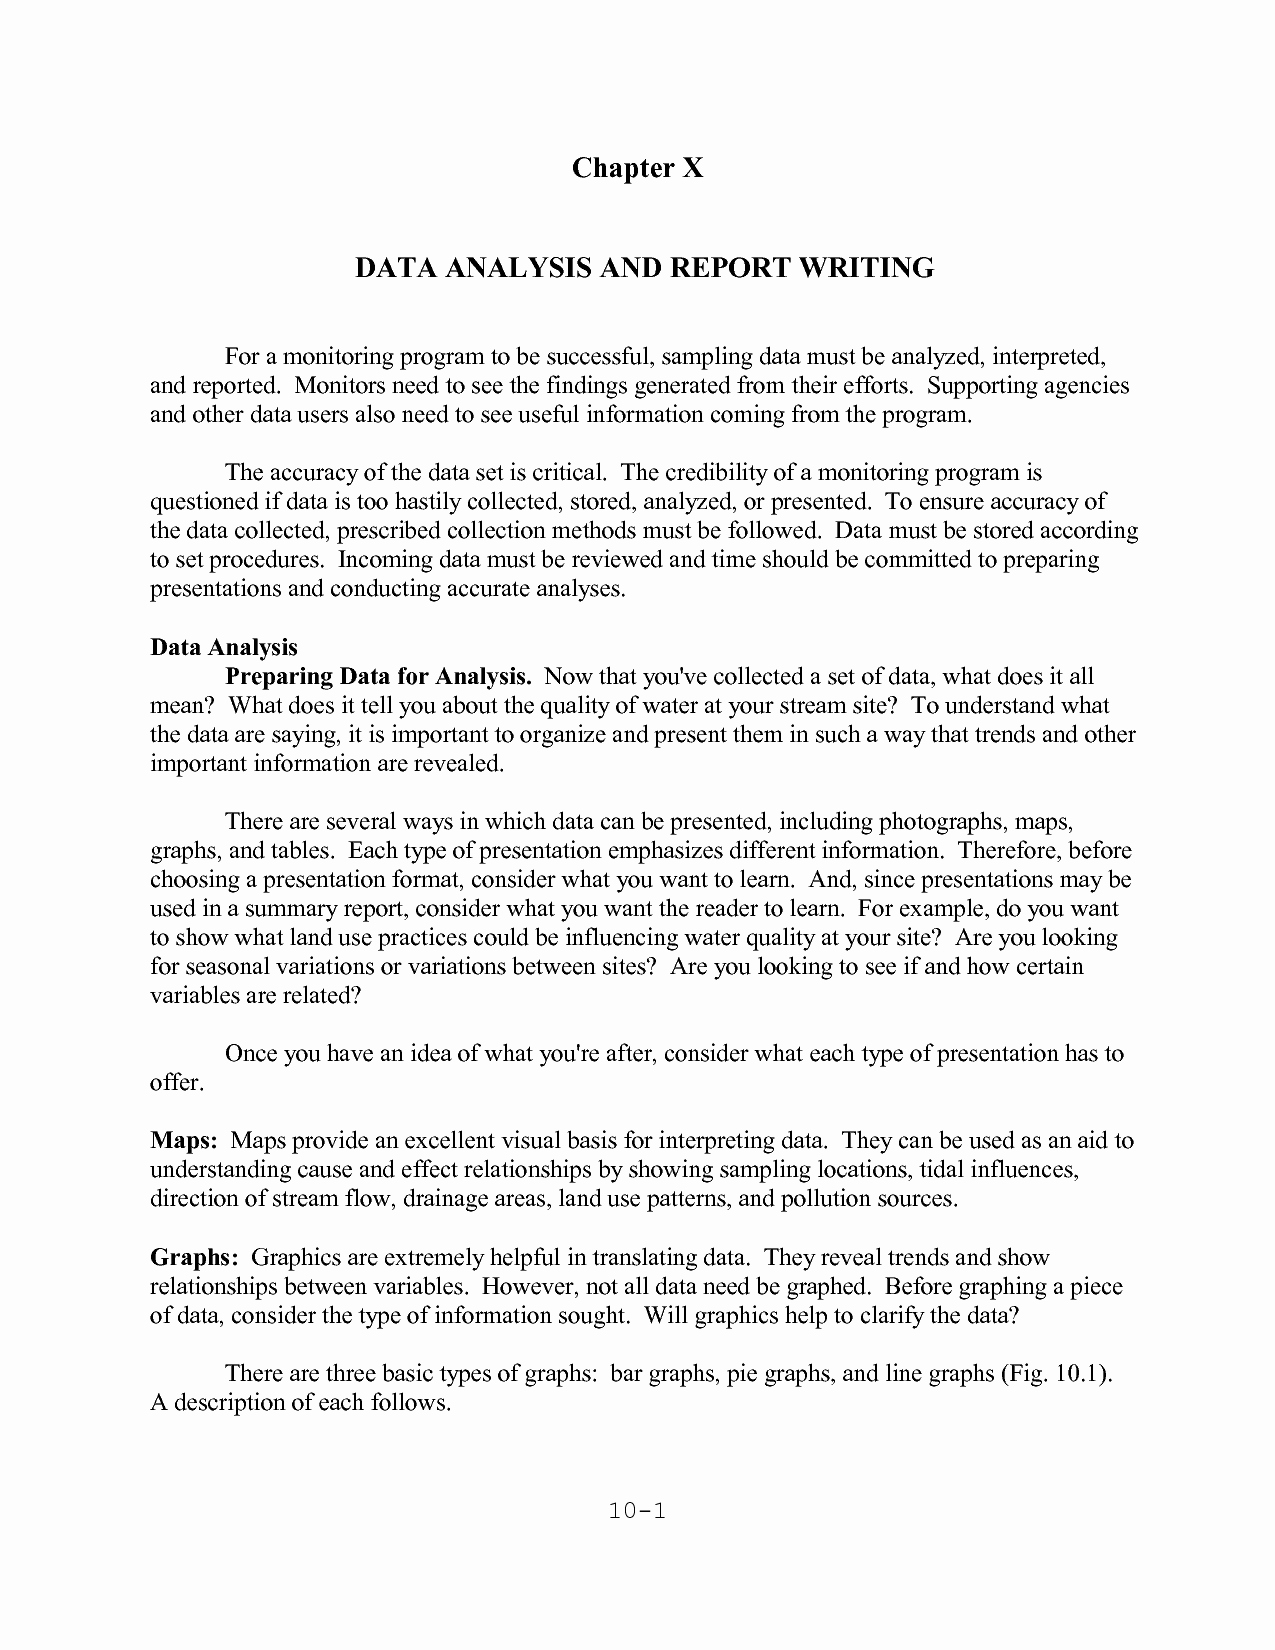 Data Analysis Report Template Awesome 18 Excellent Business Analysis Report Samples to Inspire